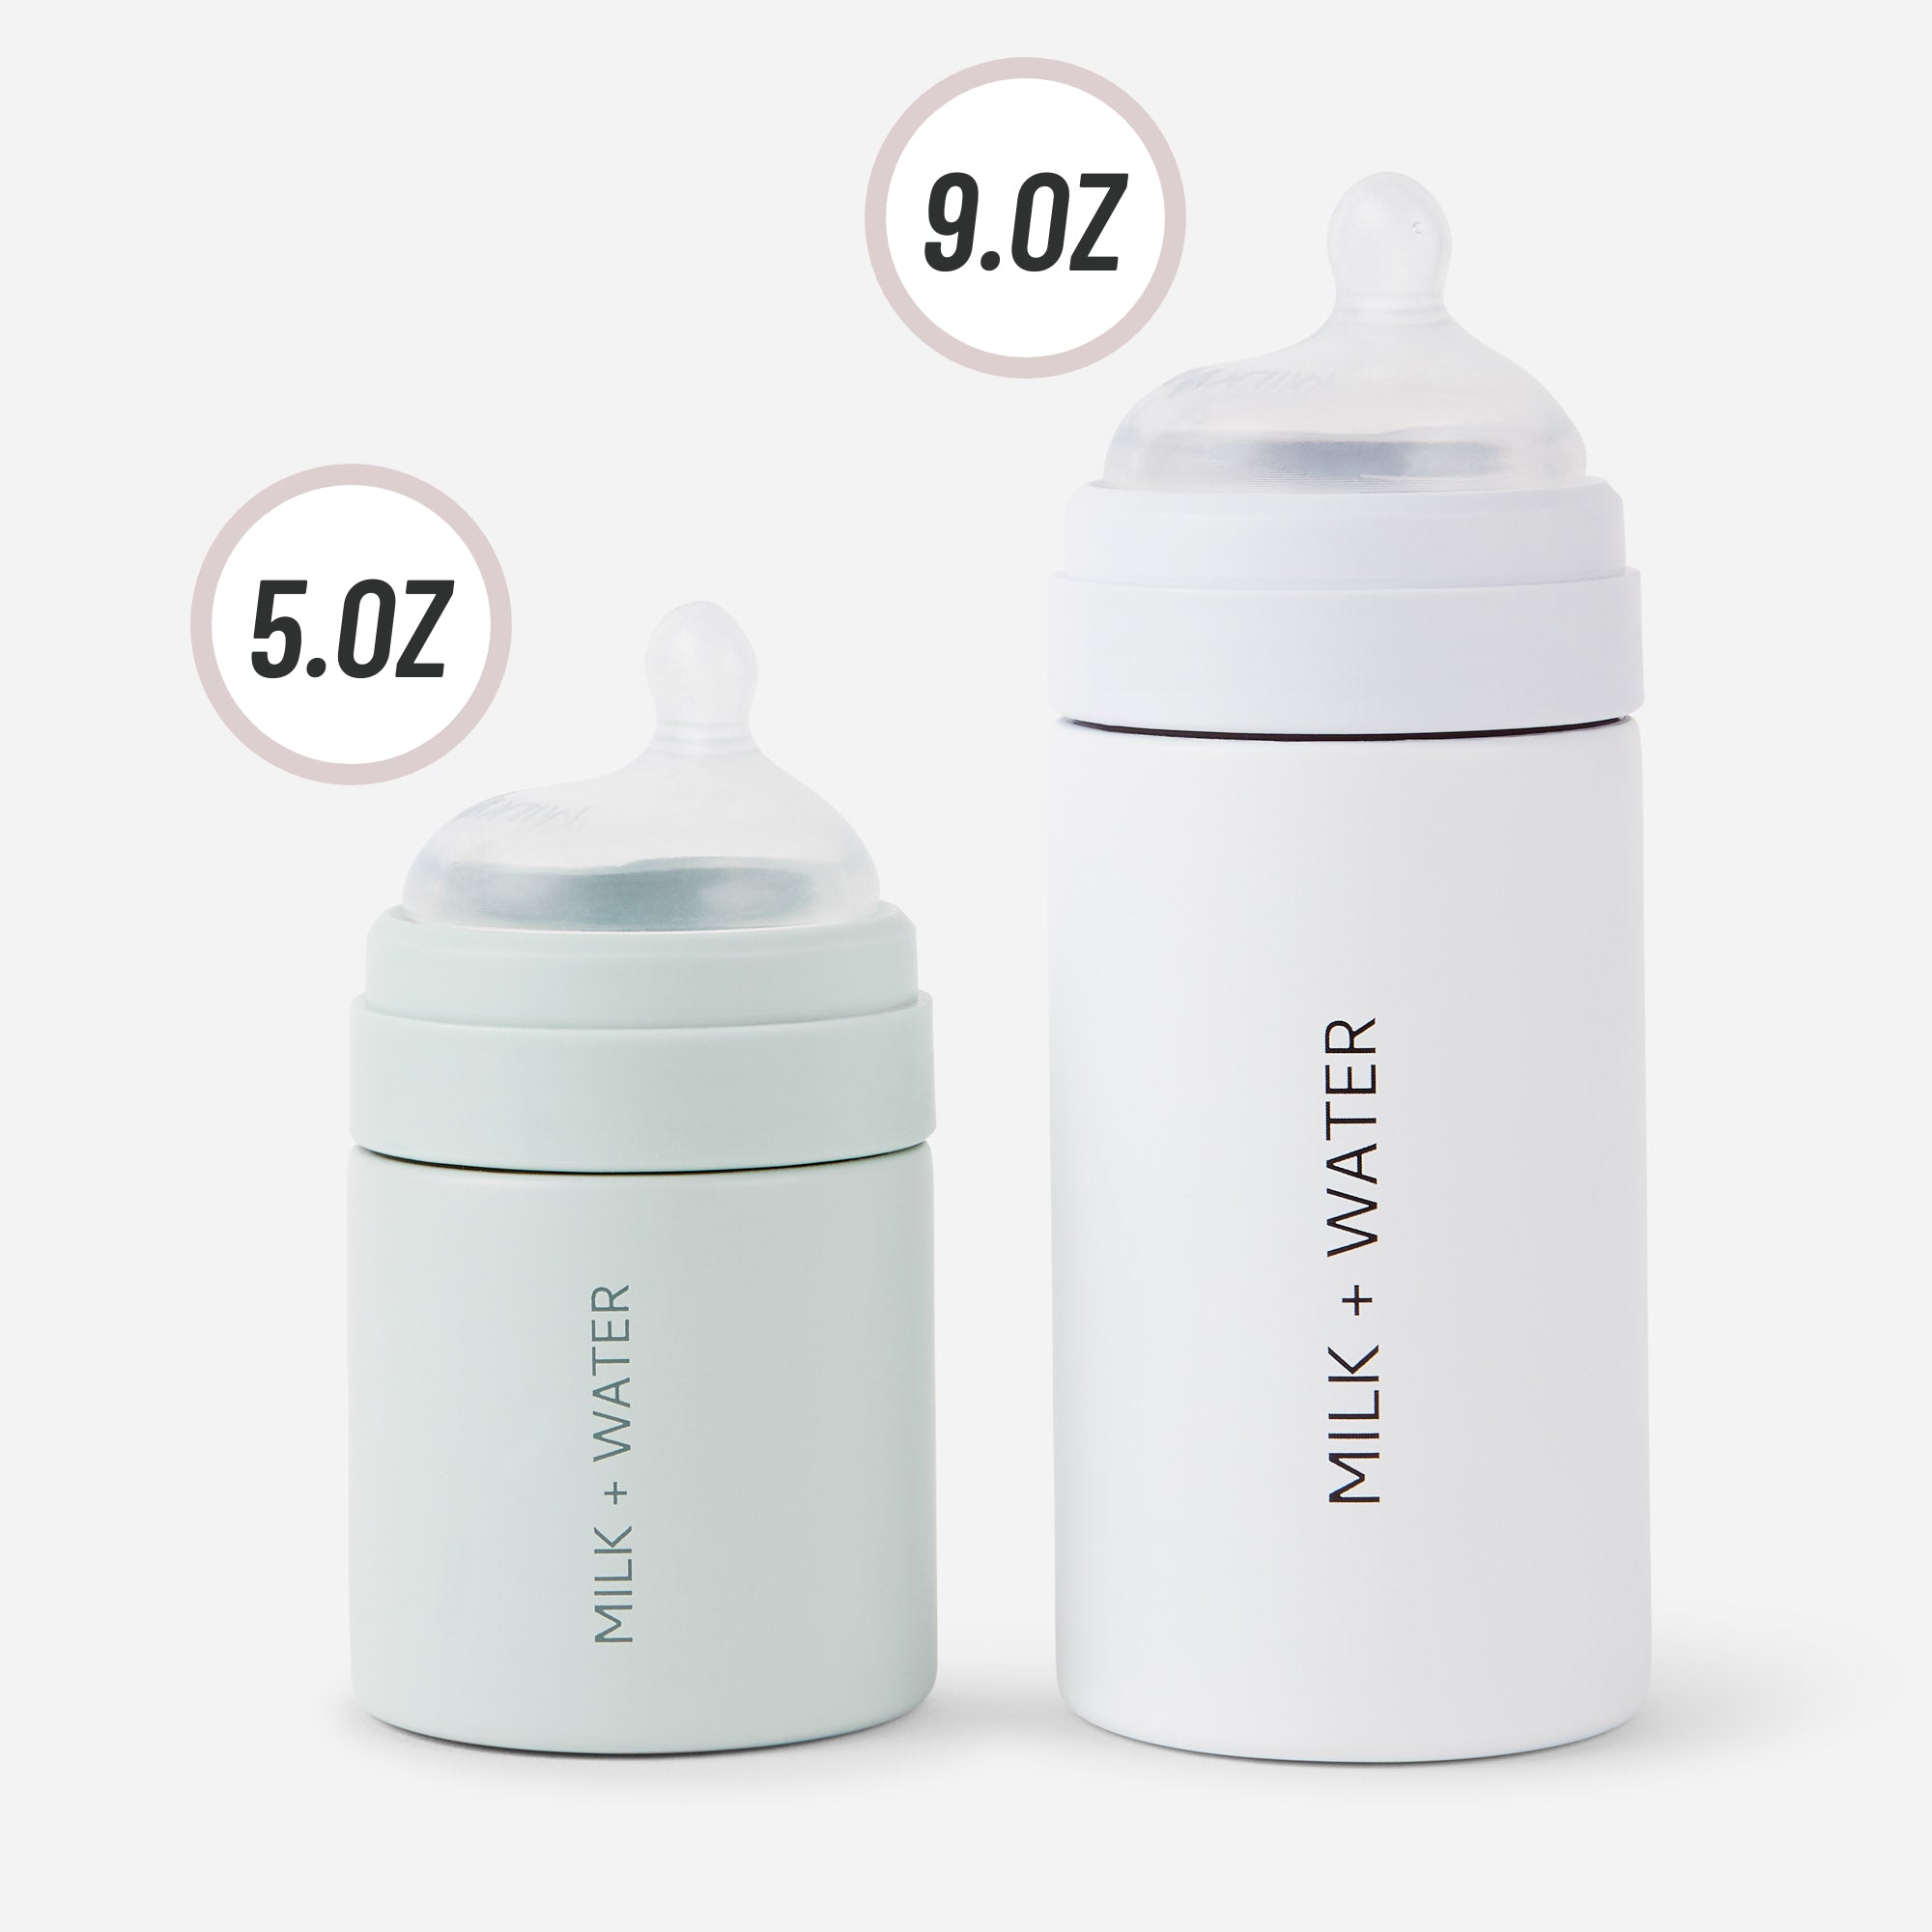 All-In-One Baby Bottle - 9oz